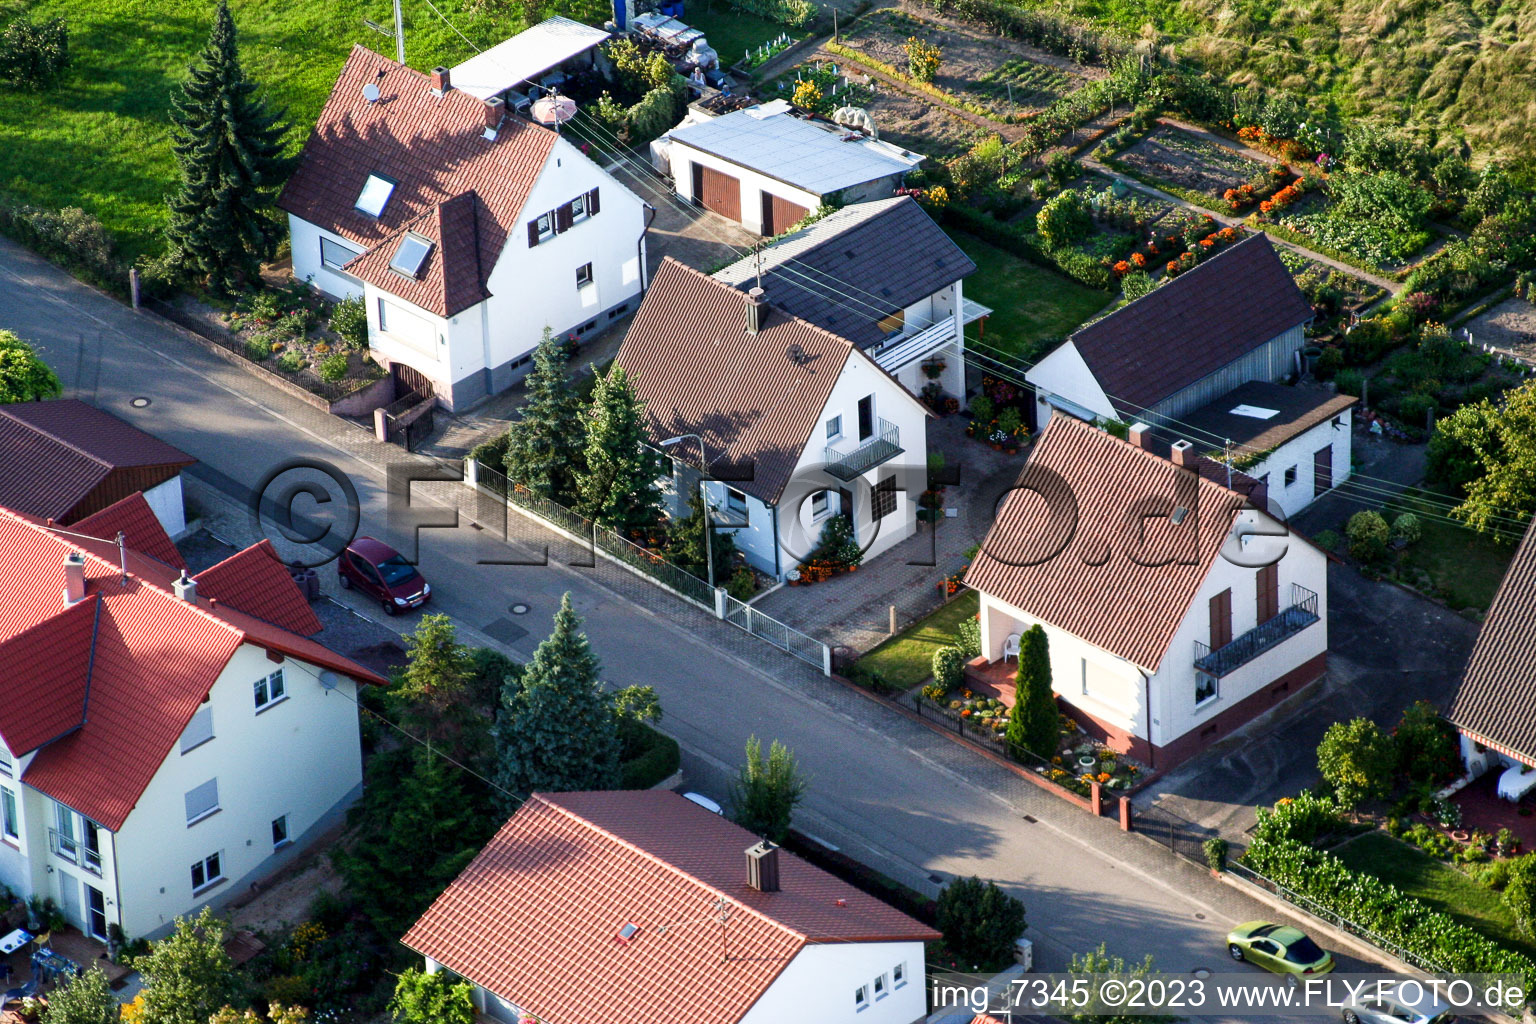 Mühlstr in Barbelroth in the state Rhineland-Palatinate, Germany from the drone perspective